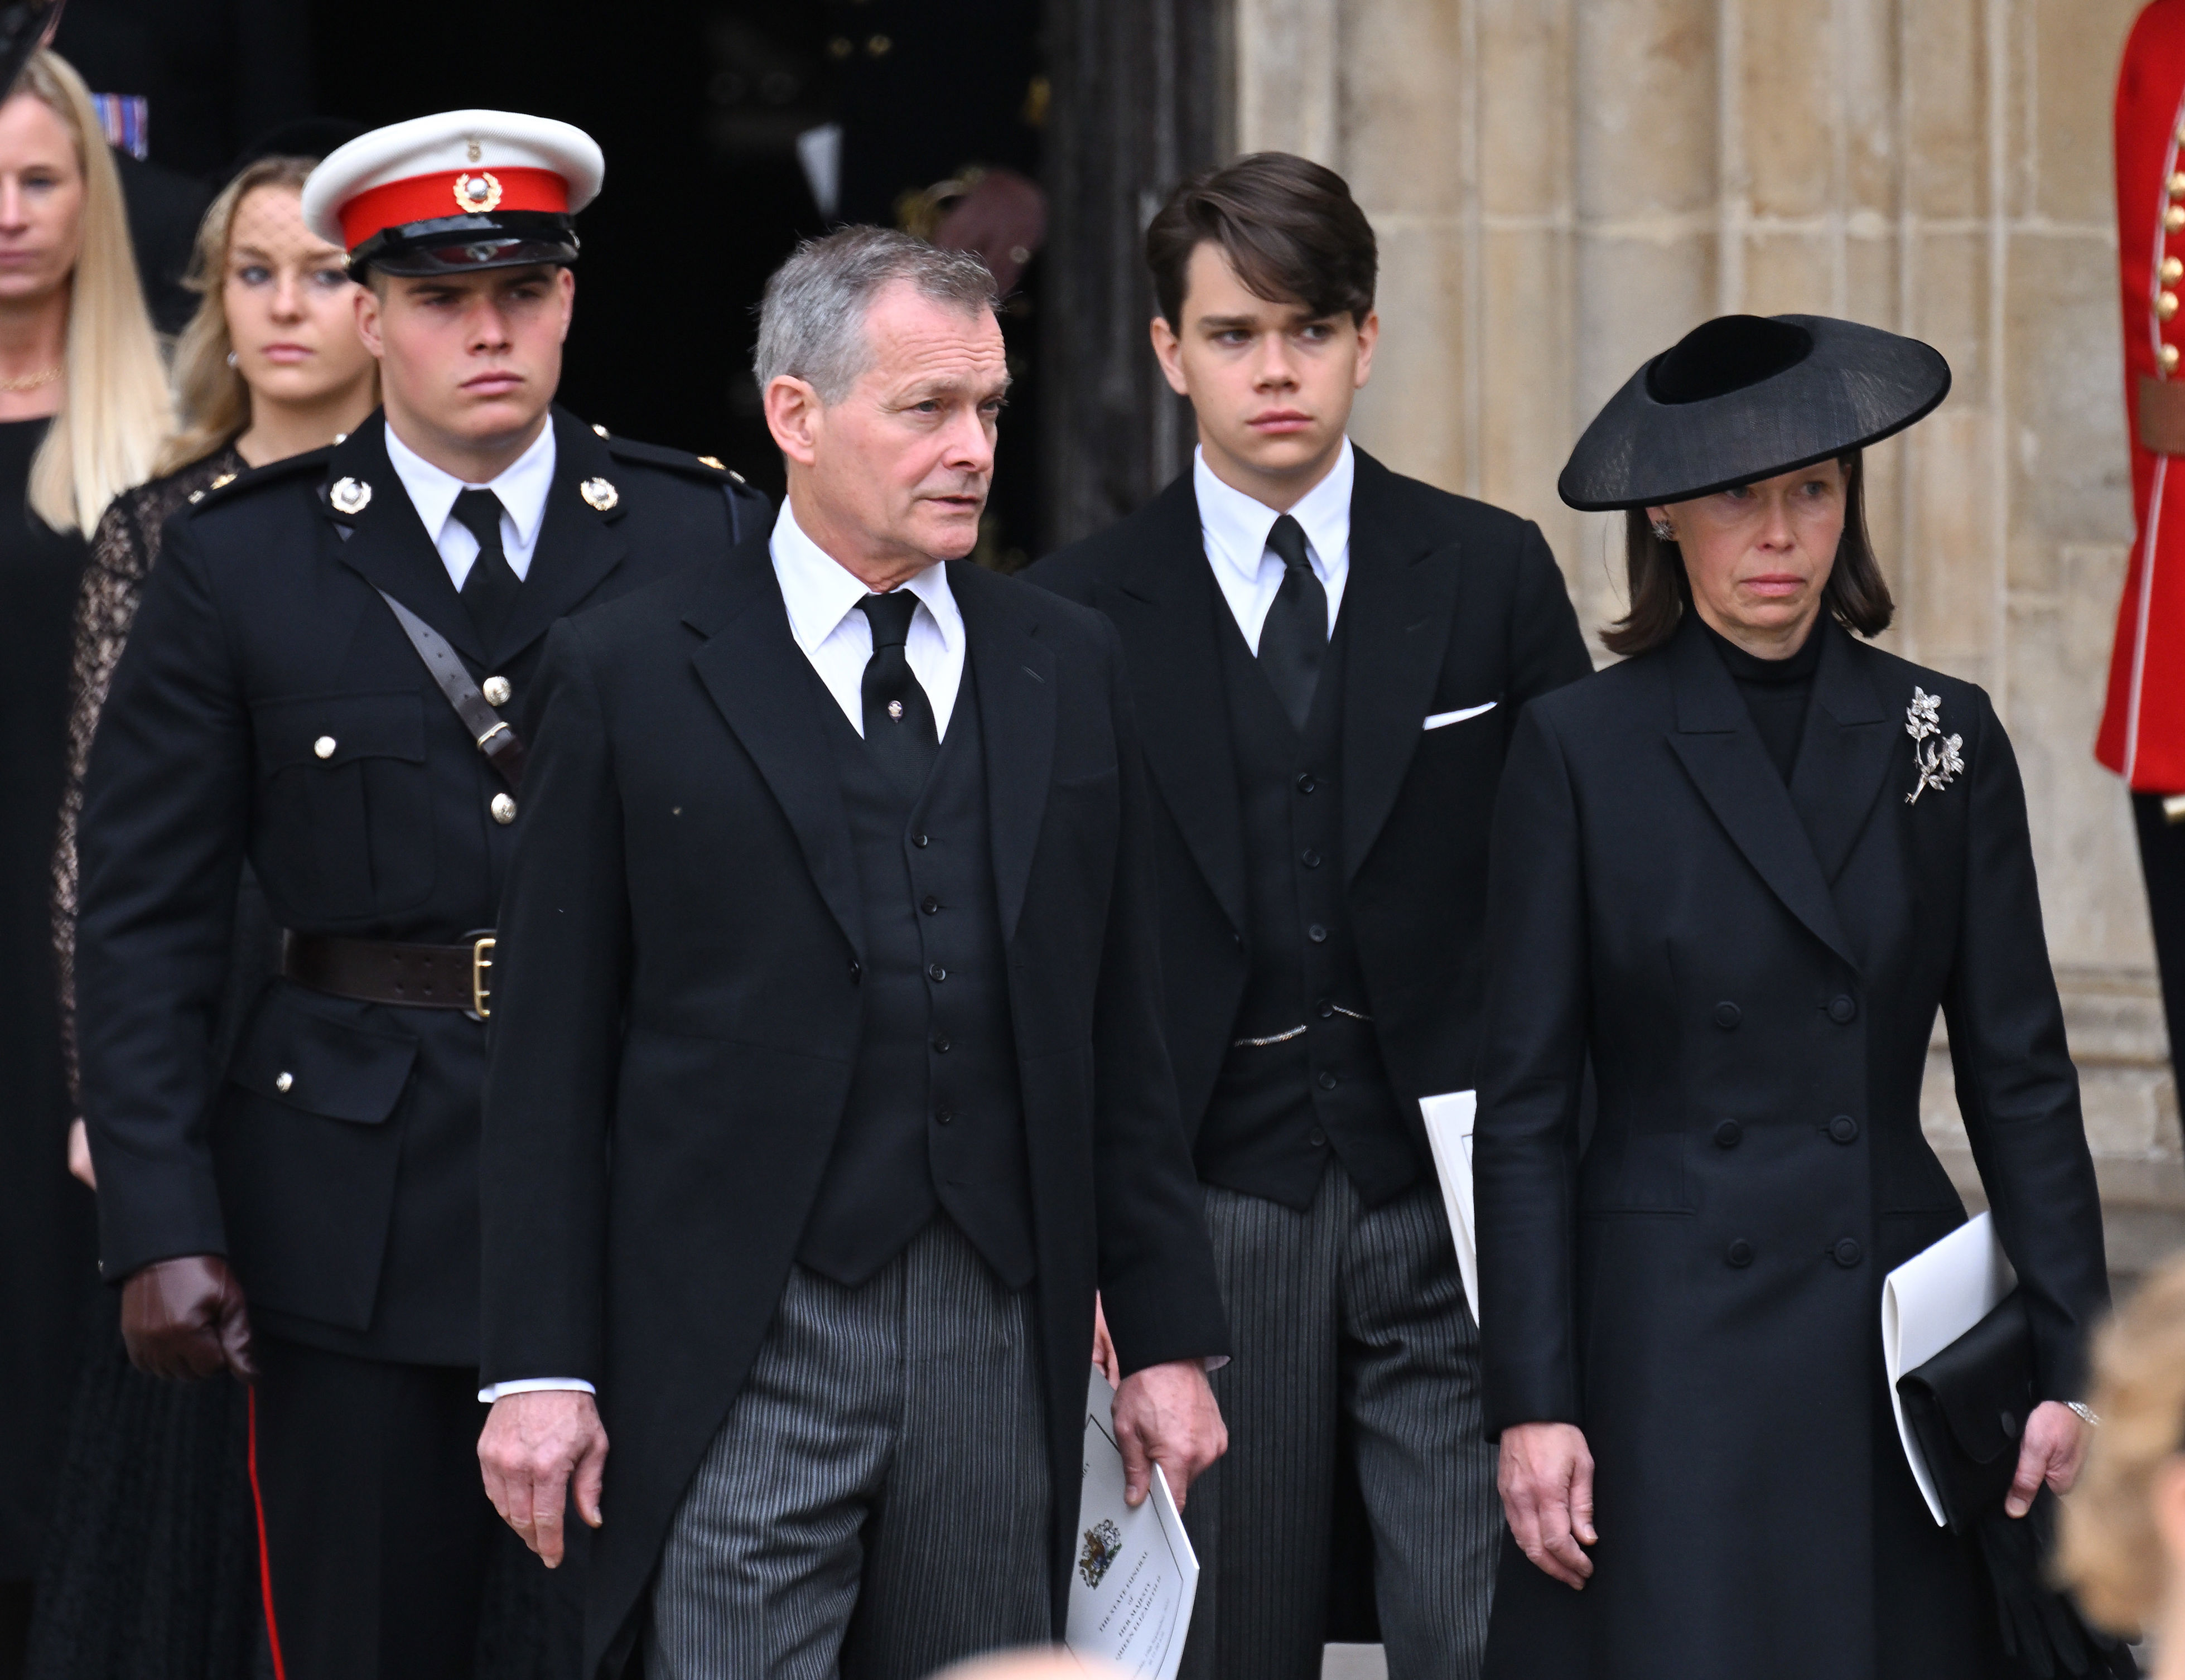 <p>In 29th place is the late Princess Margaret's grandson Samuel Chatto (second from right), the son of Lady Sarah Chatto and her husband, Daniel Chatto. Samuel studied the history of art at the University of Edinburgh and now works as a potter. He's also a trained yoga teacher.</p>